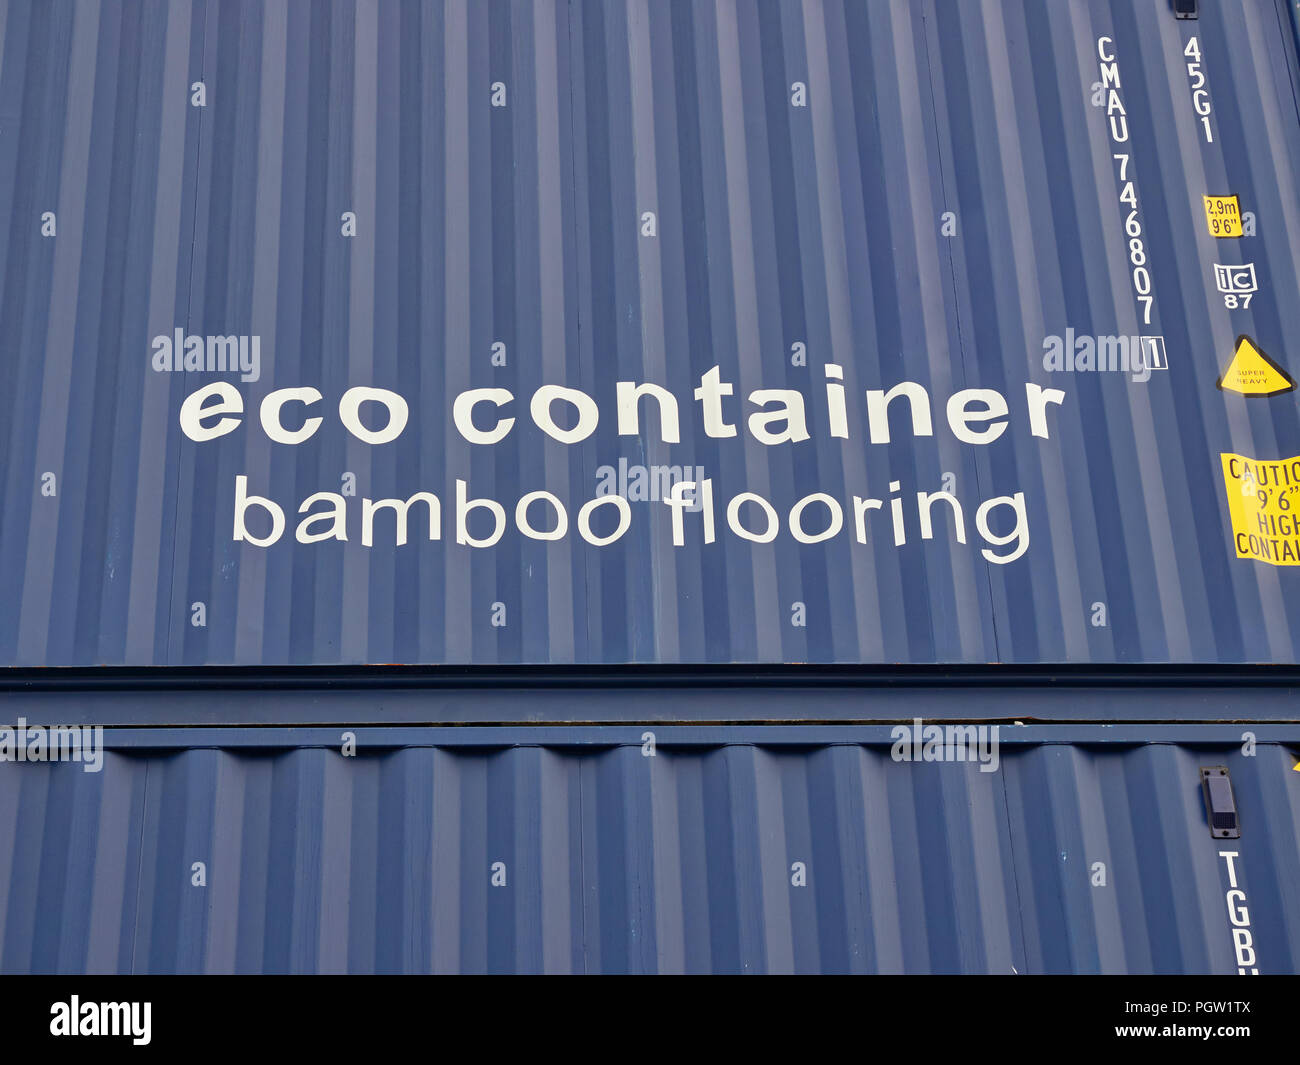 Details of an Eco Shipping Container with Bamboo Flooring, stacked up at Den Haag Container Port in Amsterdam, Holland. Stock Photo